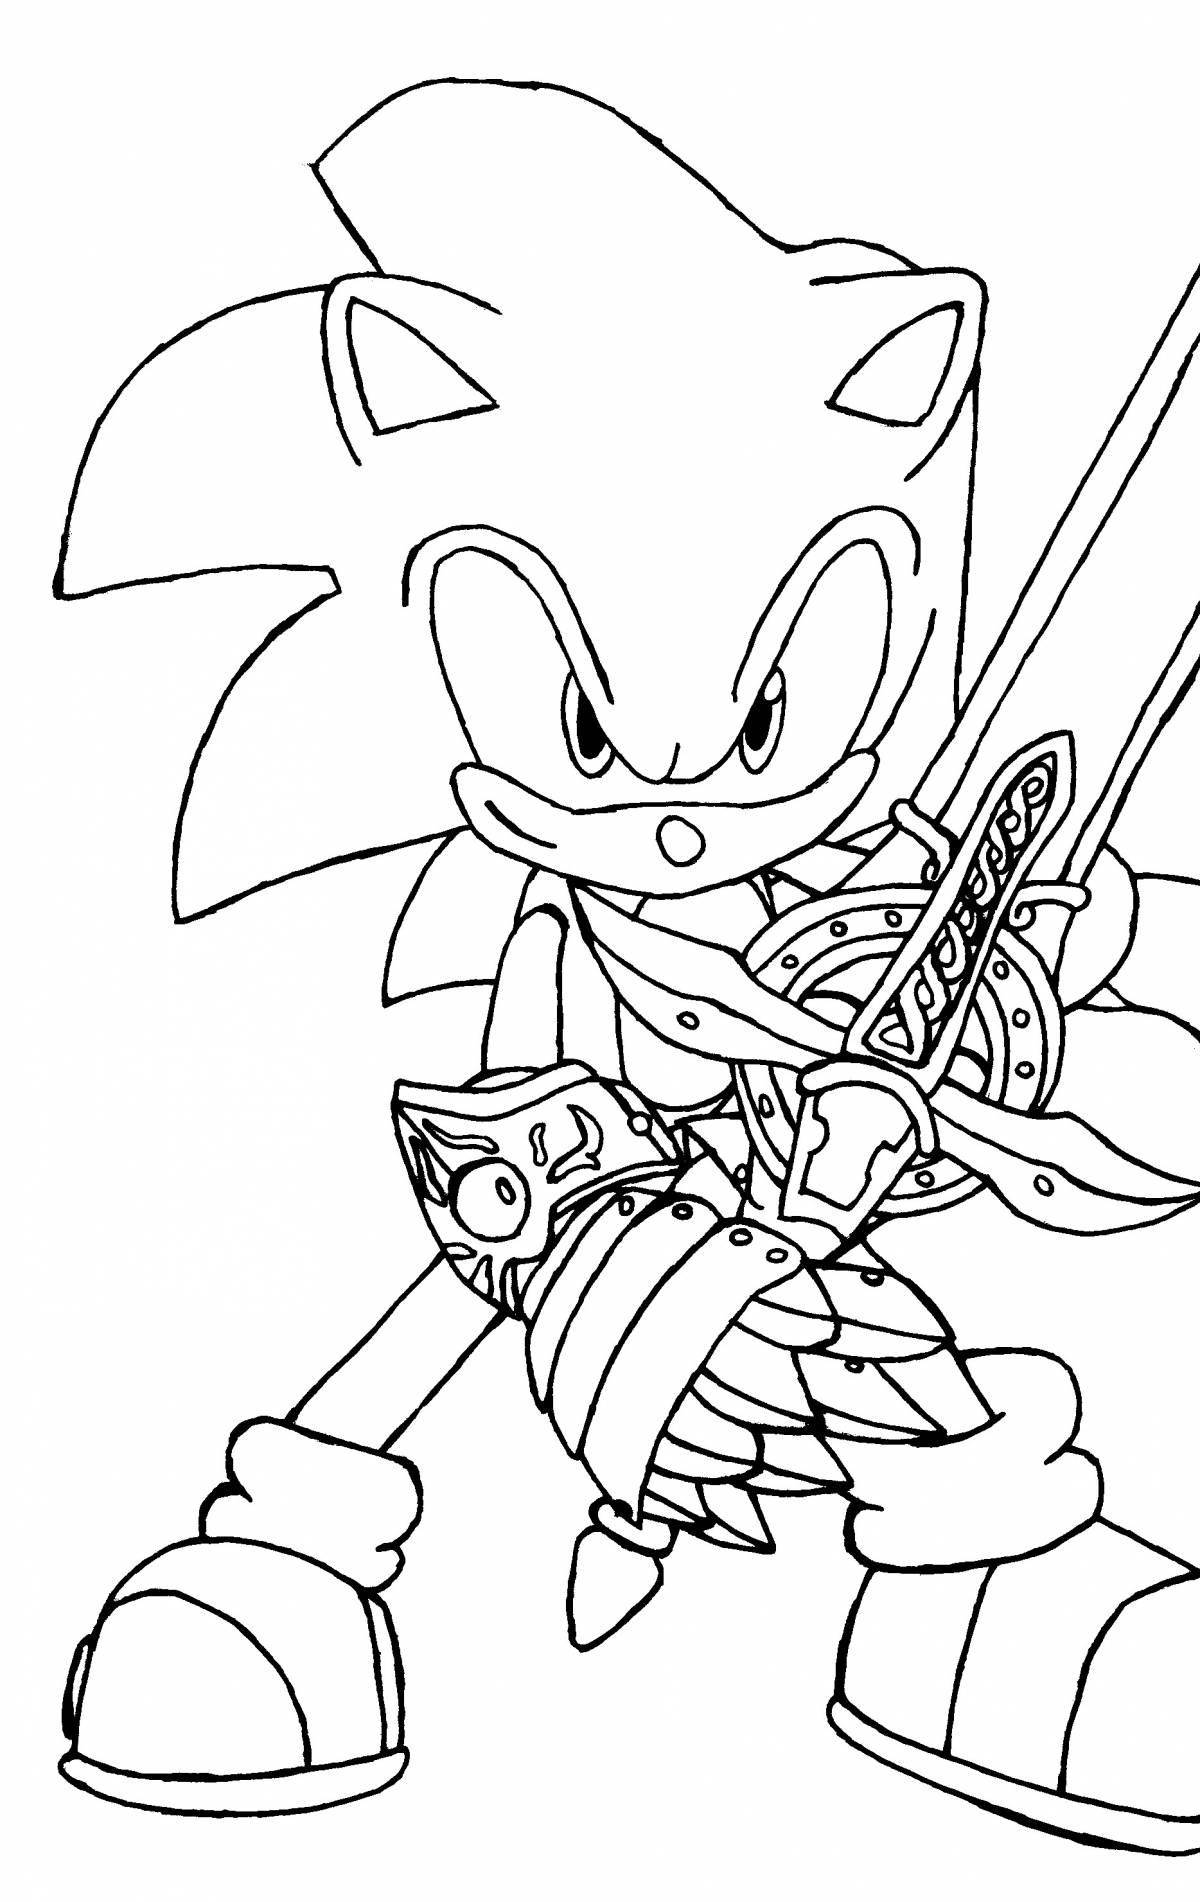 Charming sonic monster coloring book